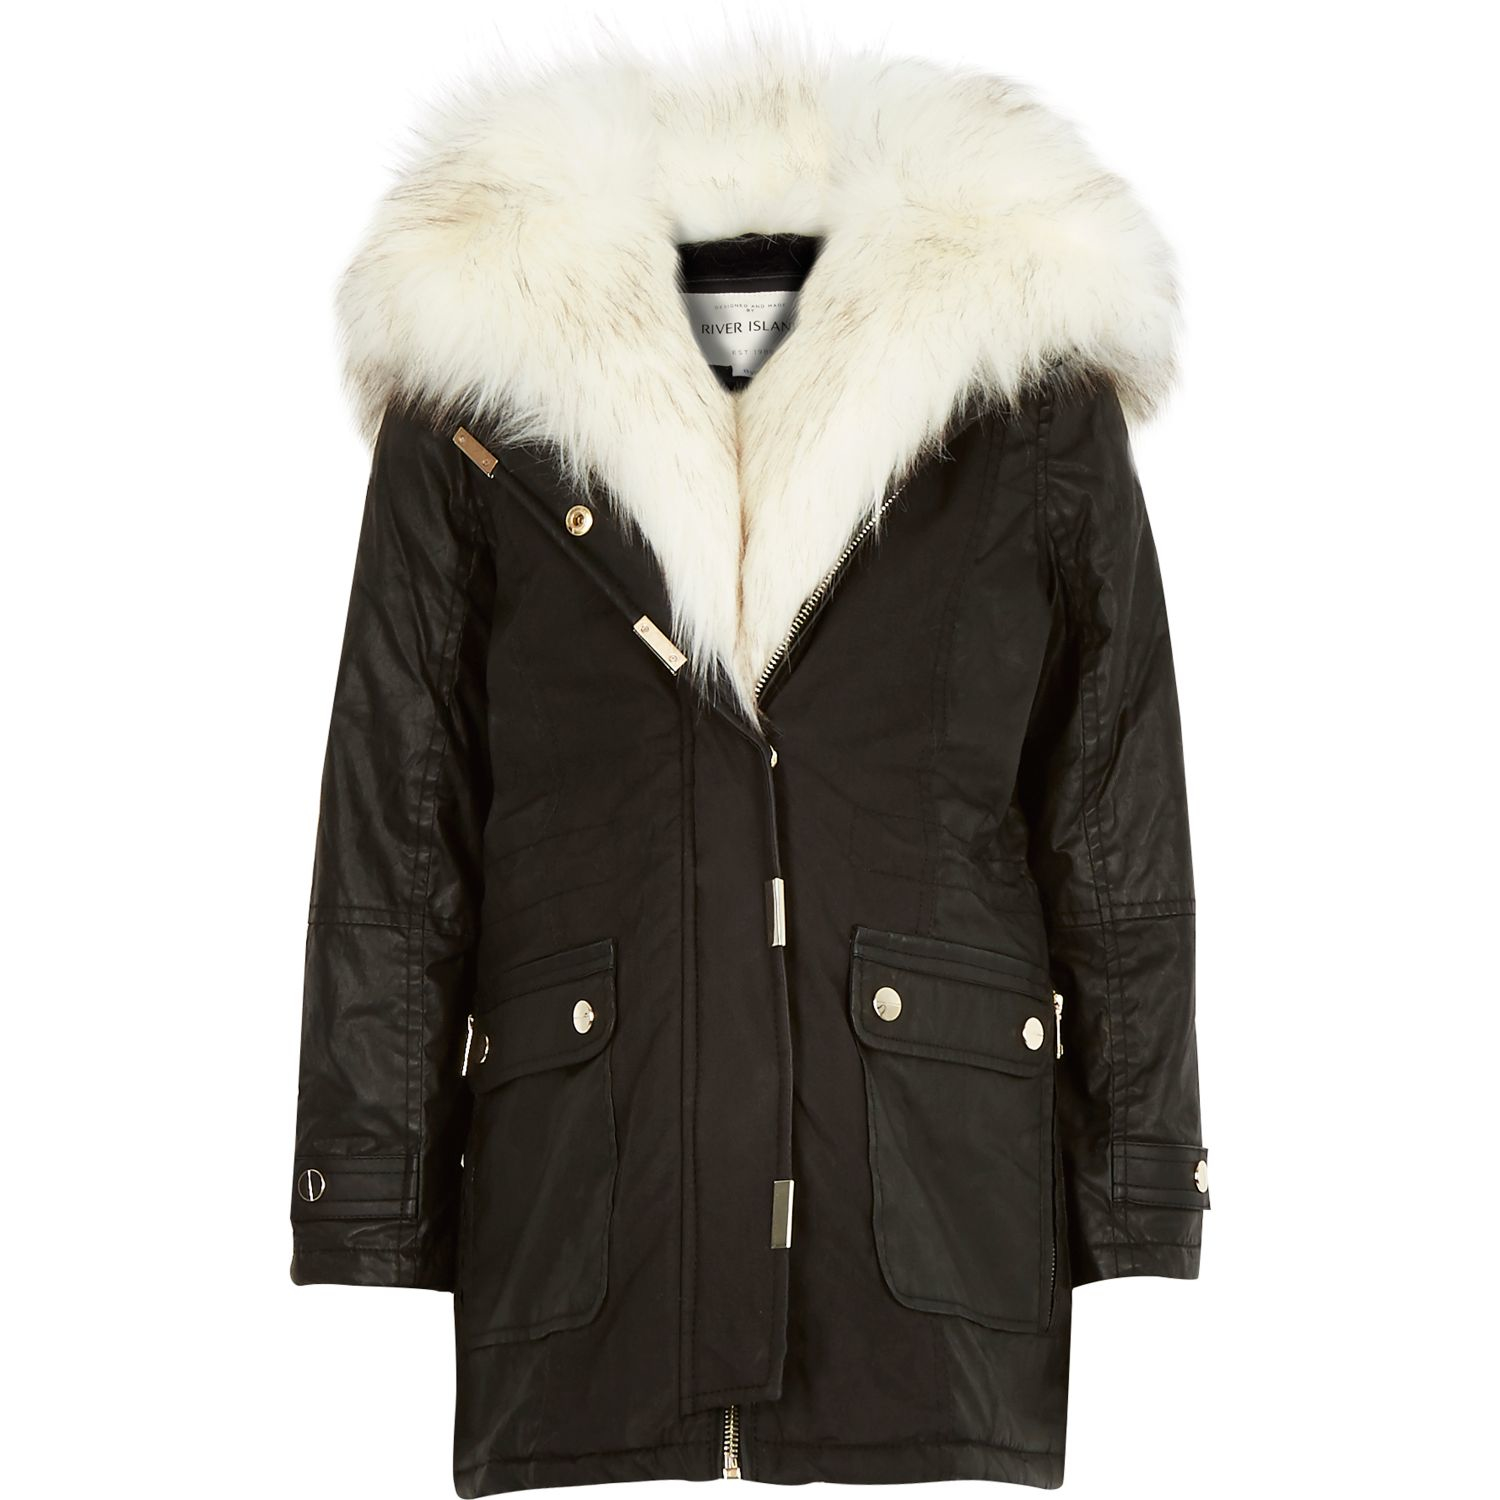 Children's Coats River Island Flash Sales, UP TO 59% OFF | www.seo.org